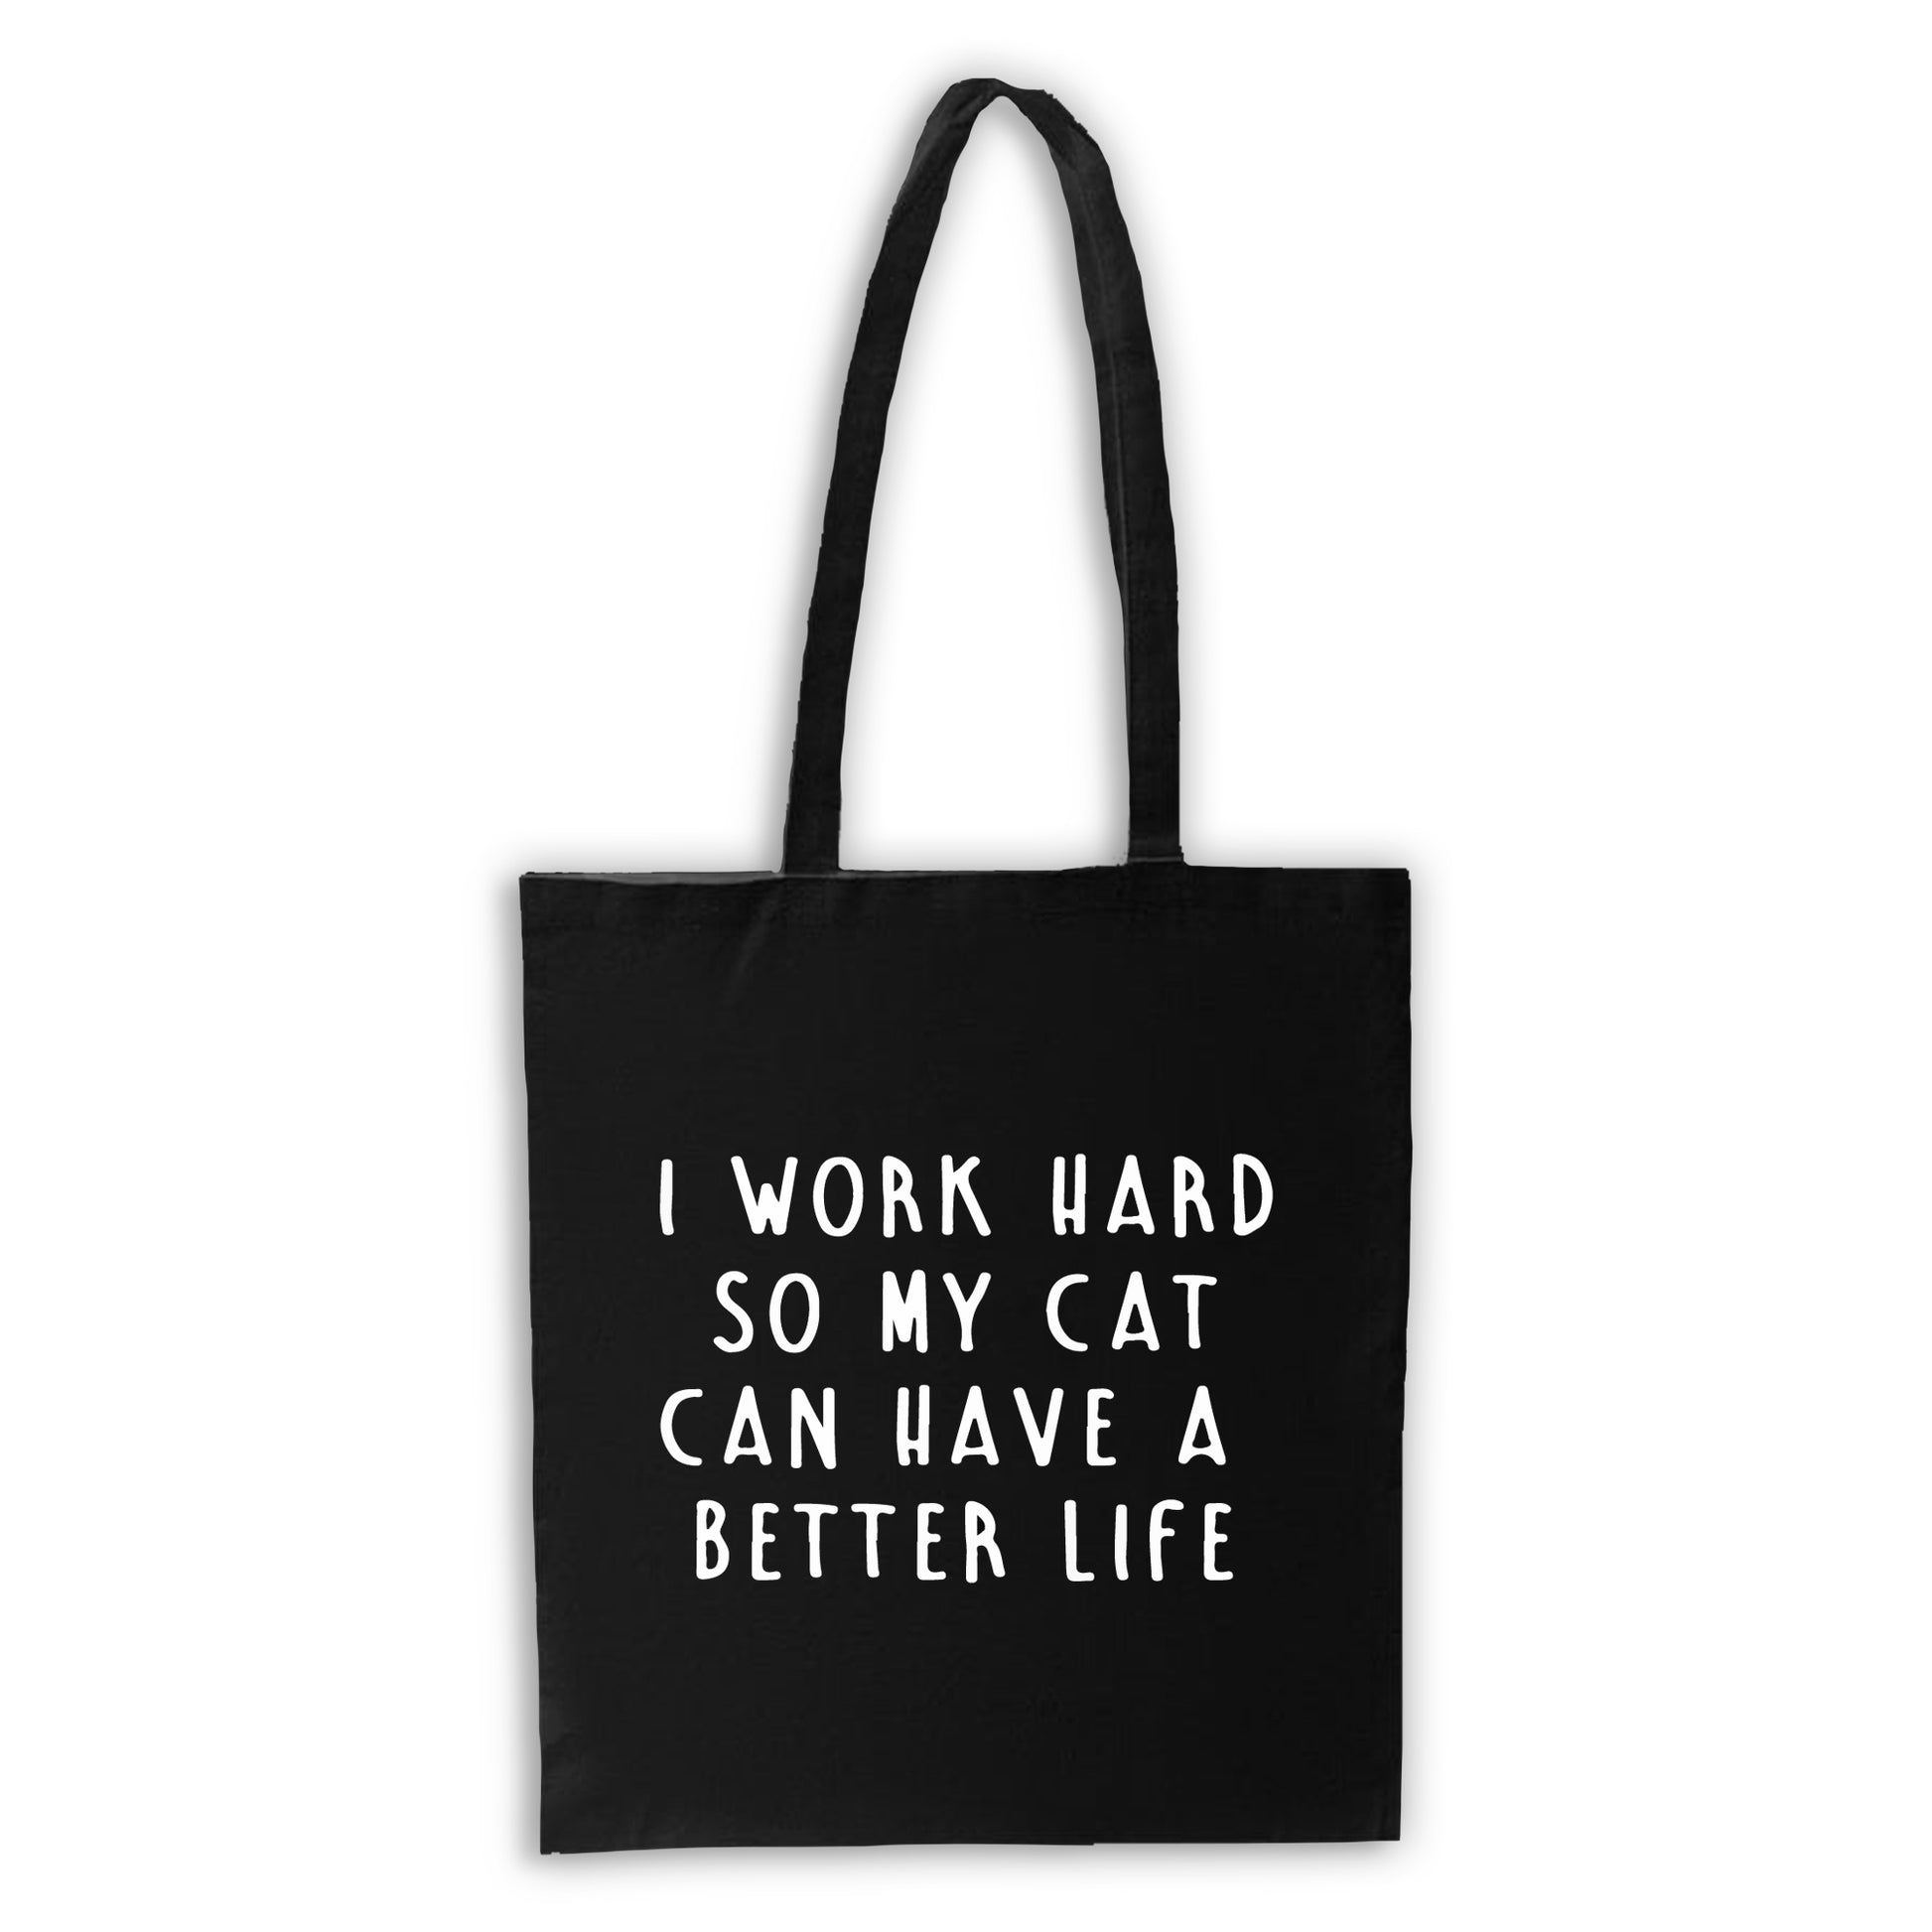 I Work Hard So My Cat Can Have a Better Life - Black Tote Bag